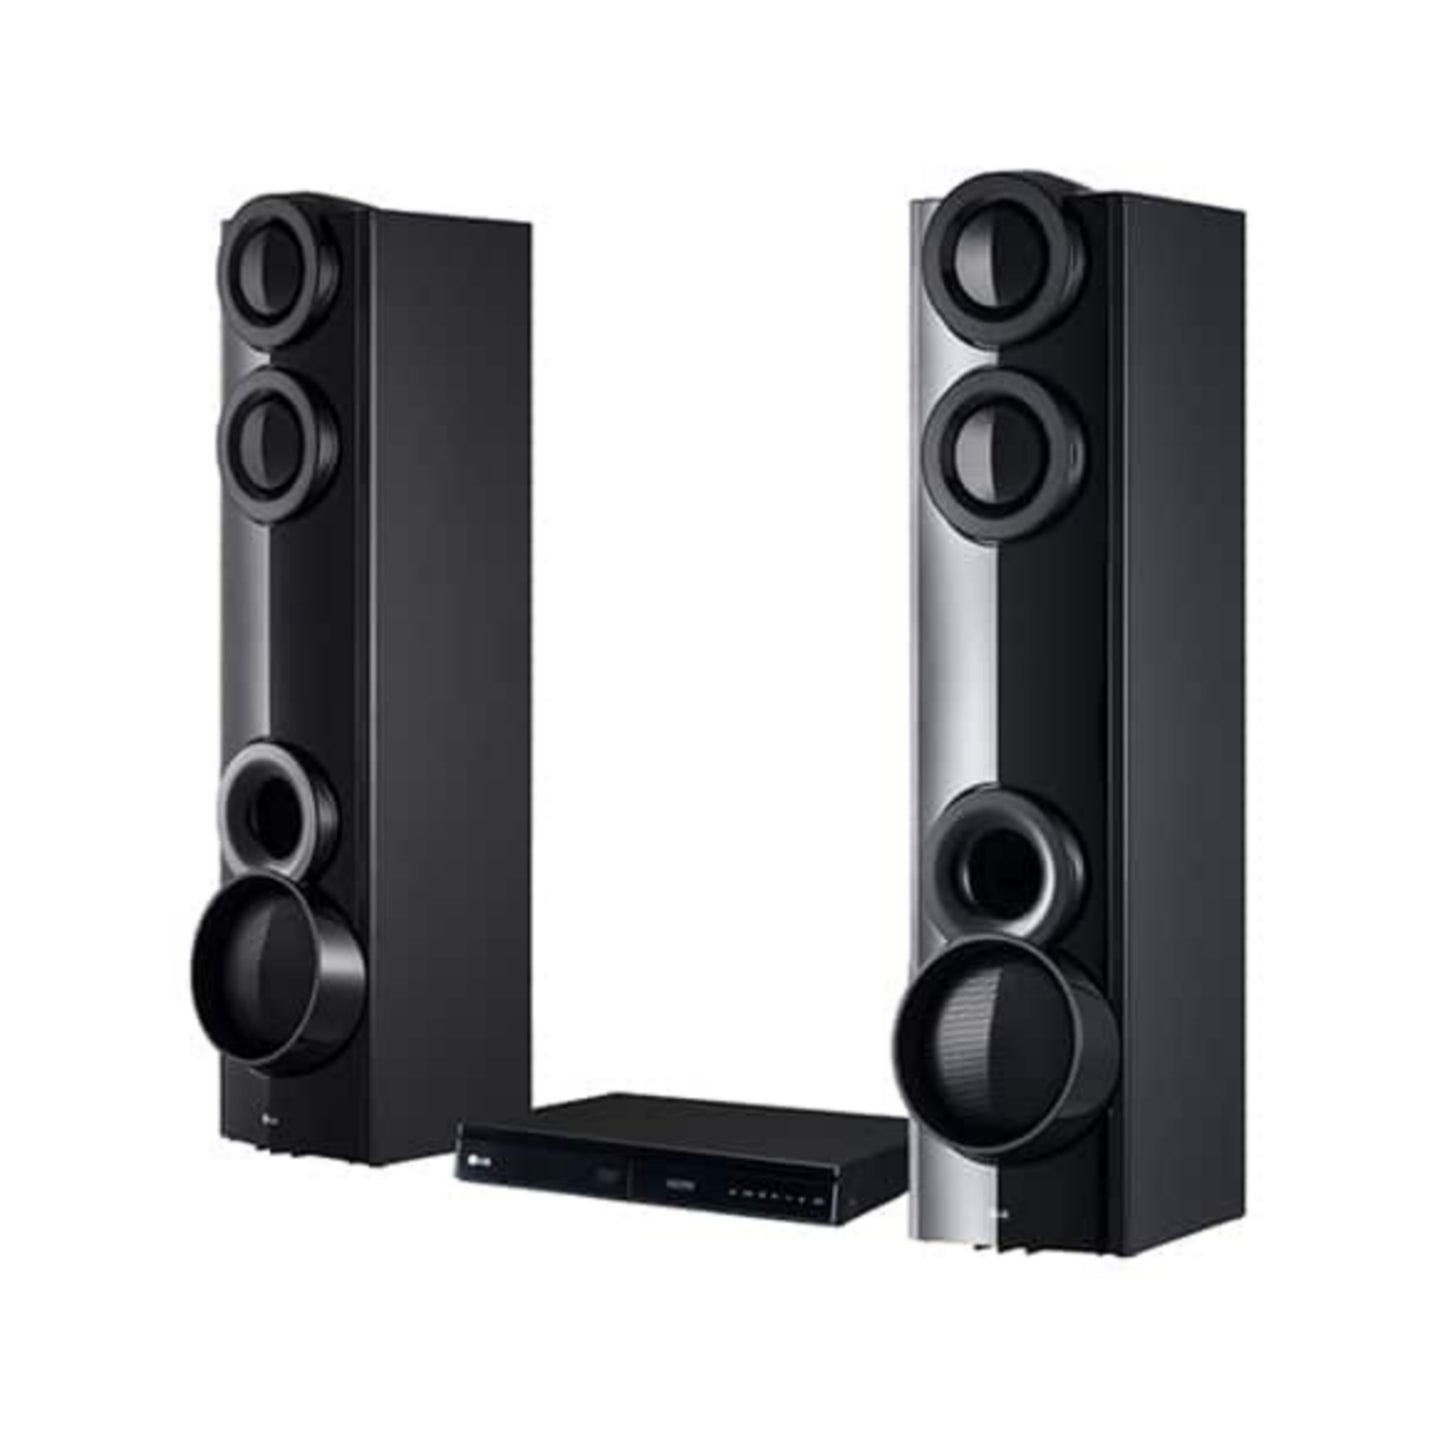 LG LHD675BG 4.2 1000W Dual SubWoofer DVD/CD Home Theater System - Brand New